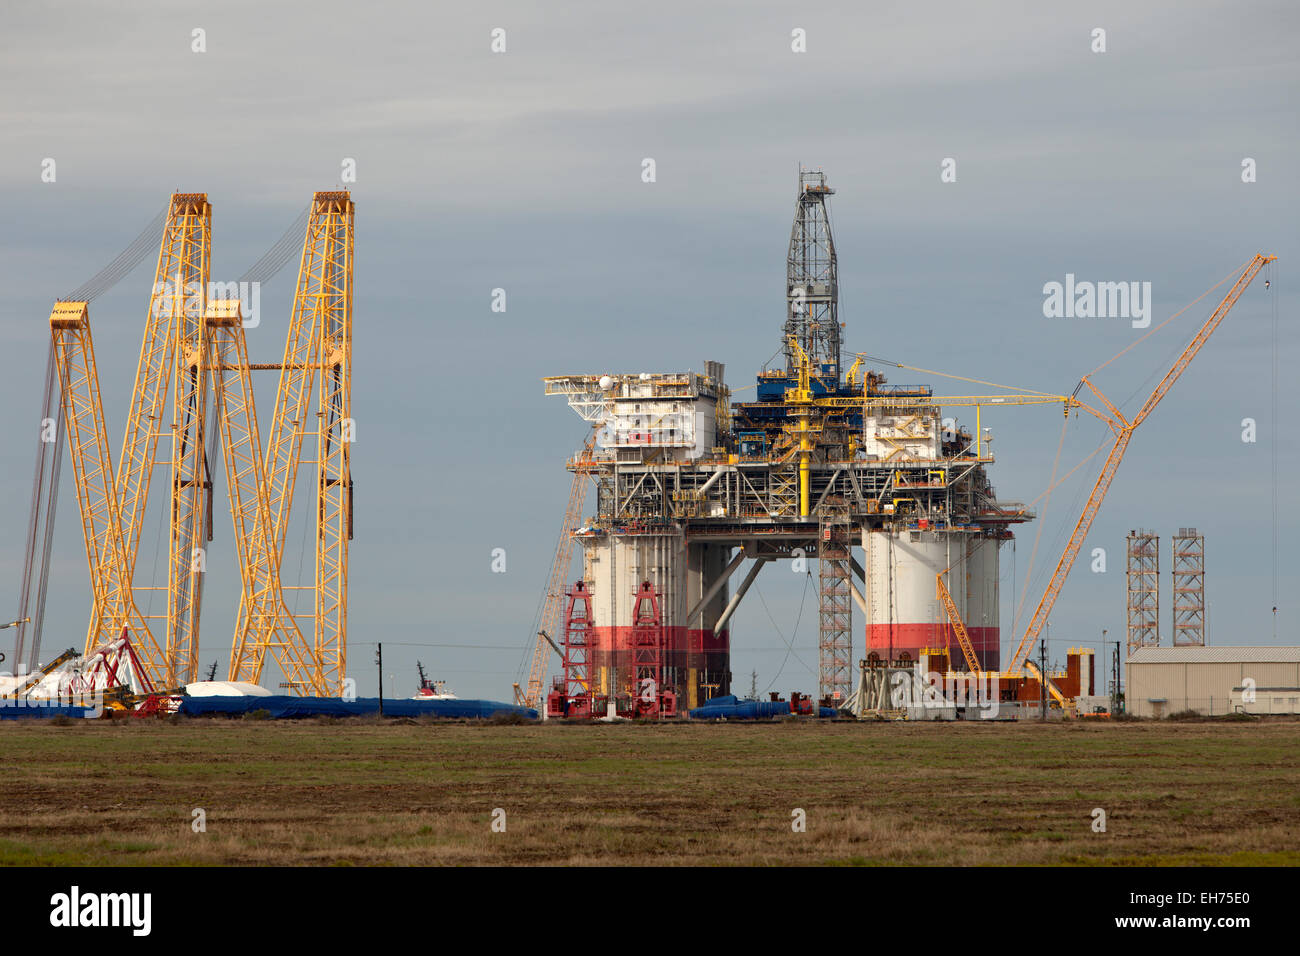 Construction of 'Big Foot' deepwater oil & gas drill platform nearing completion. Stock Photo